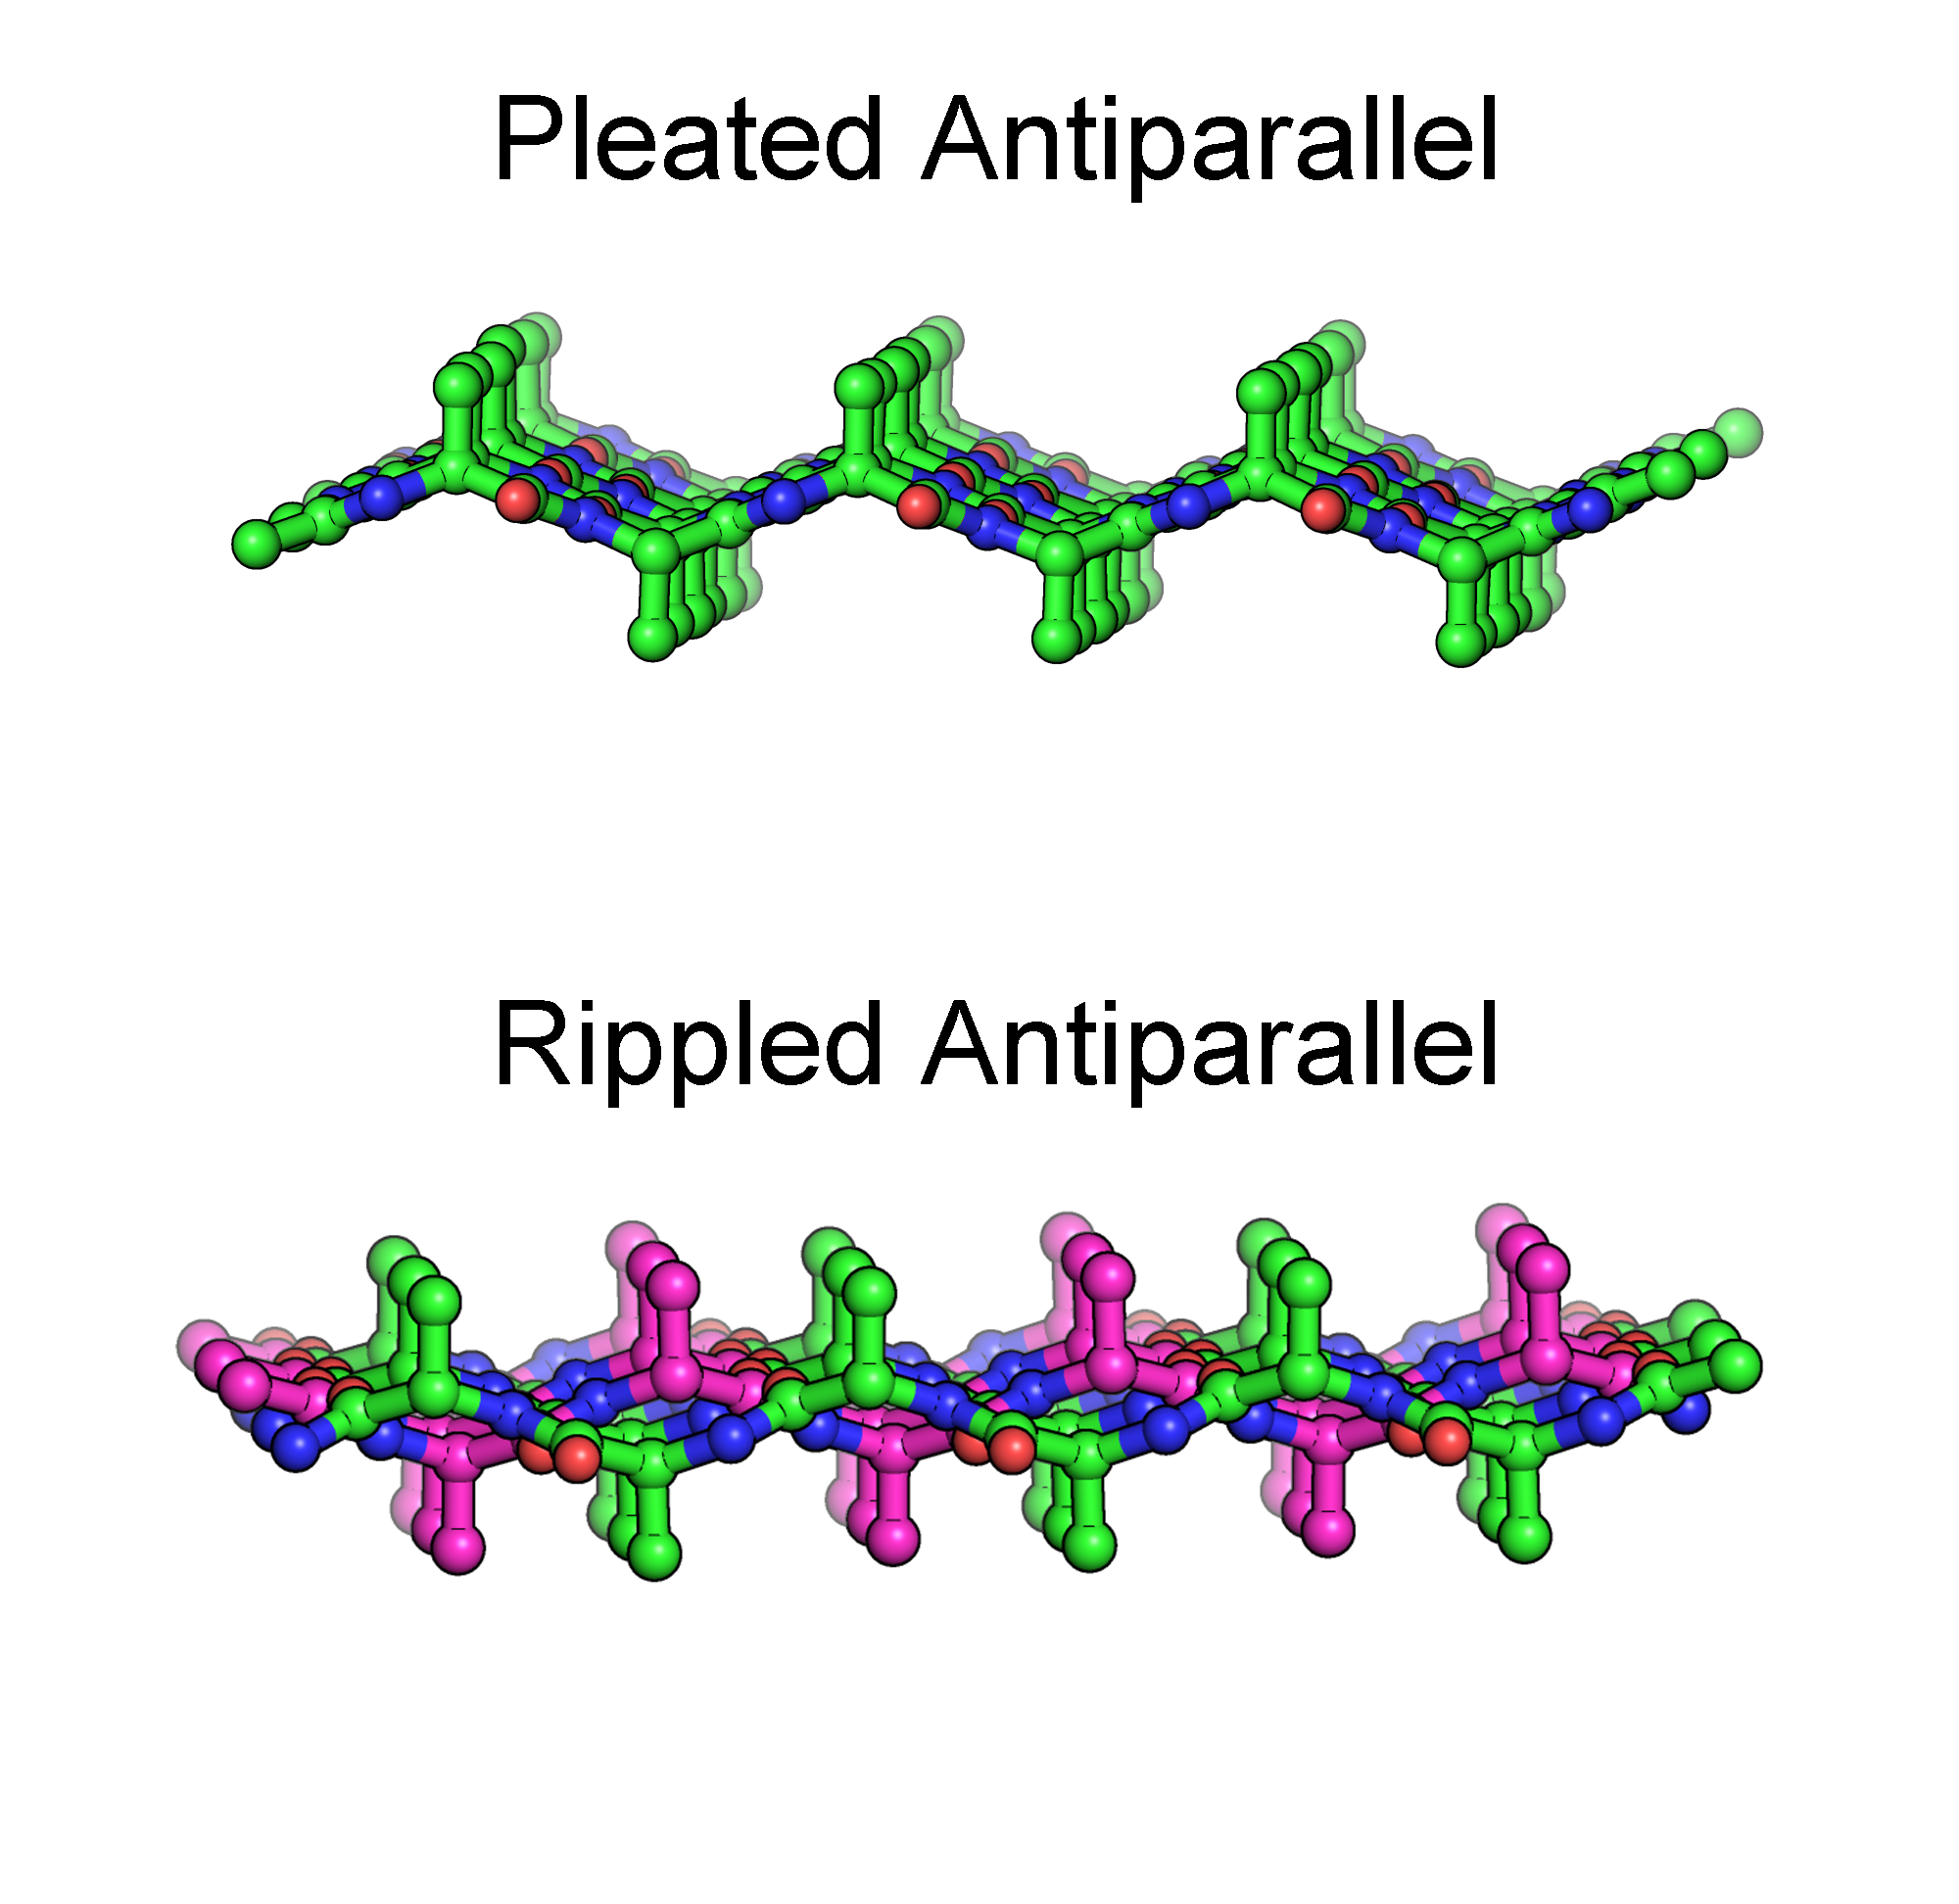 Two sets of colored graphics, one showing a singe peptide and the second showing two interleaved peptides.